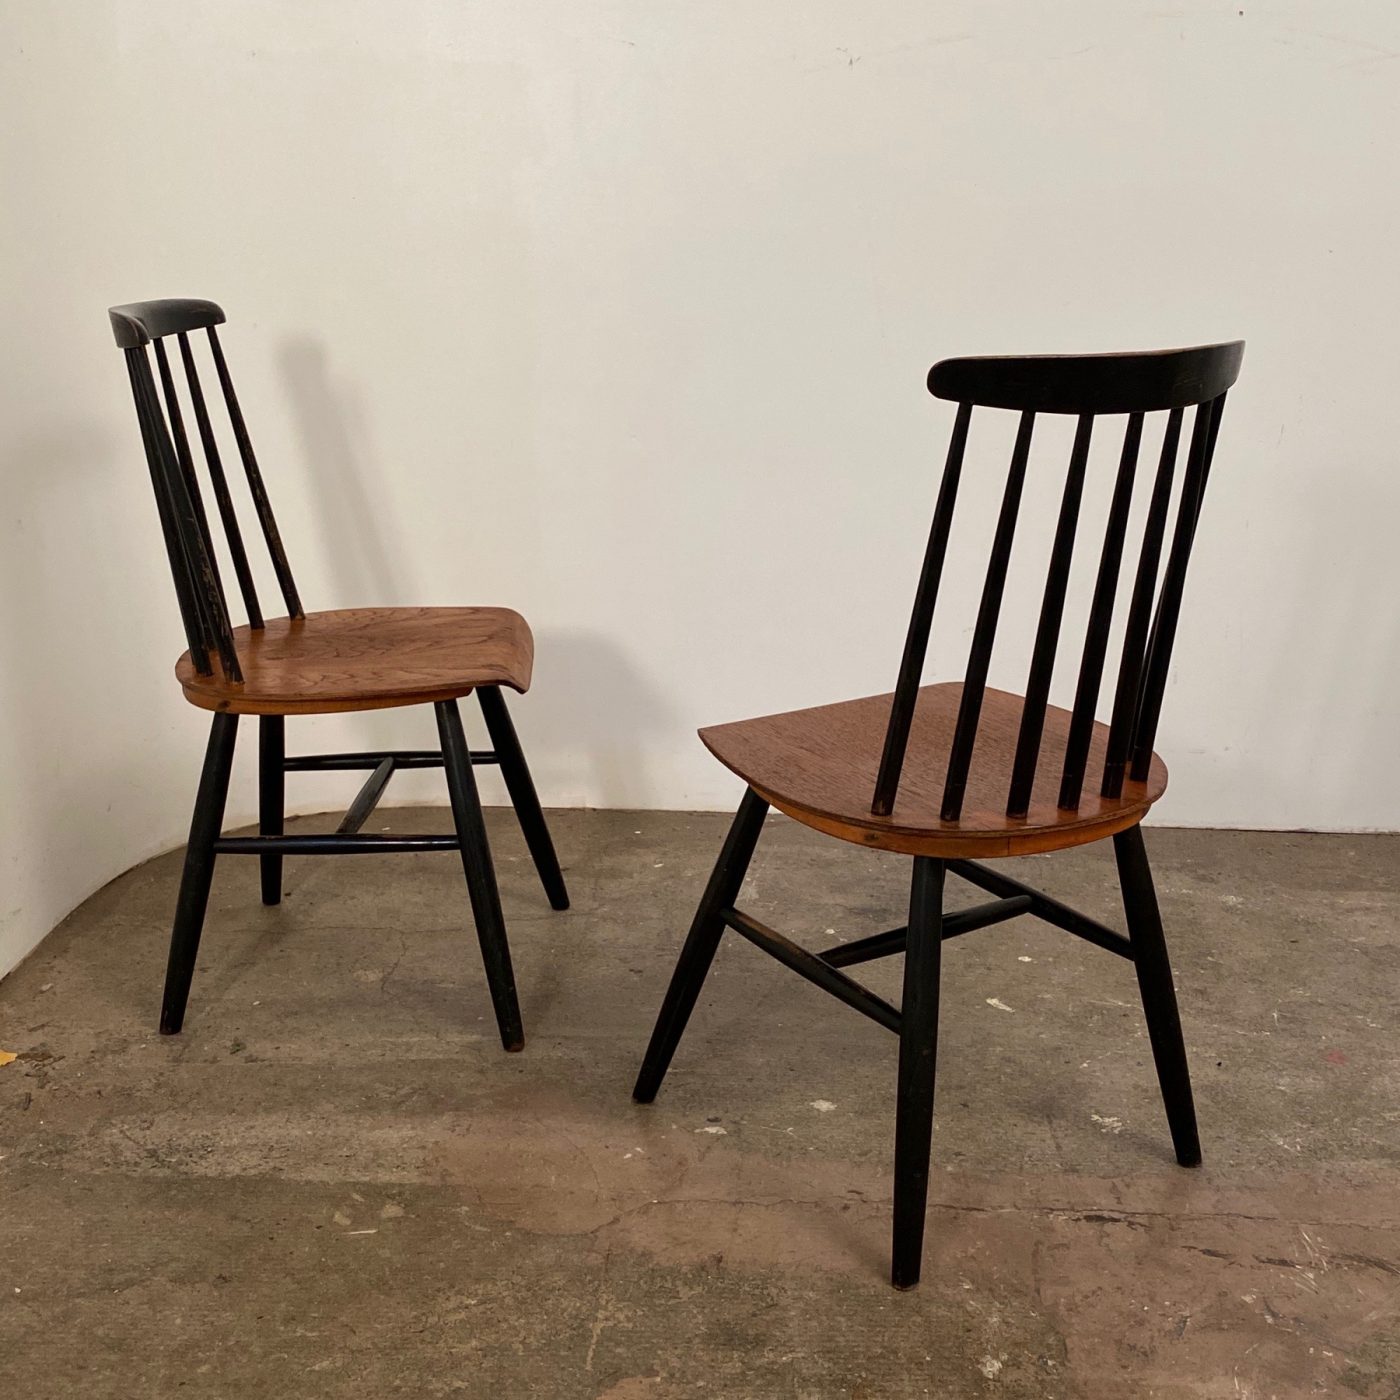 vintage-chairs0007